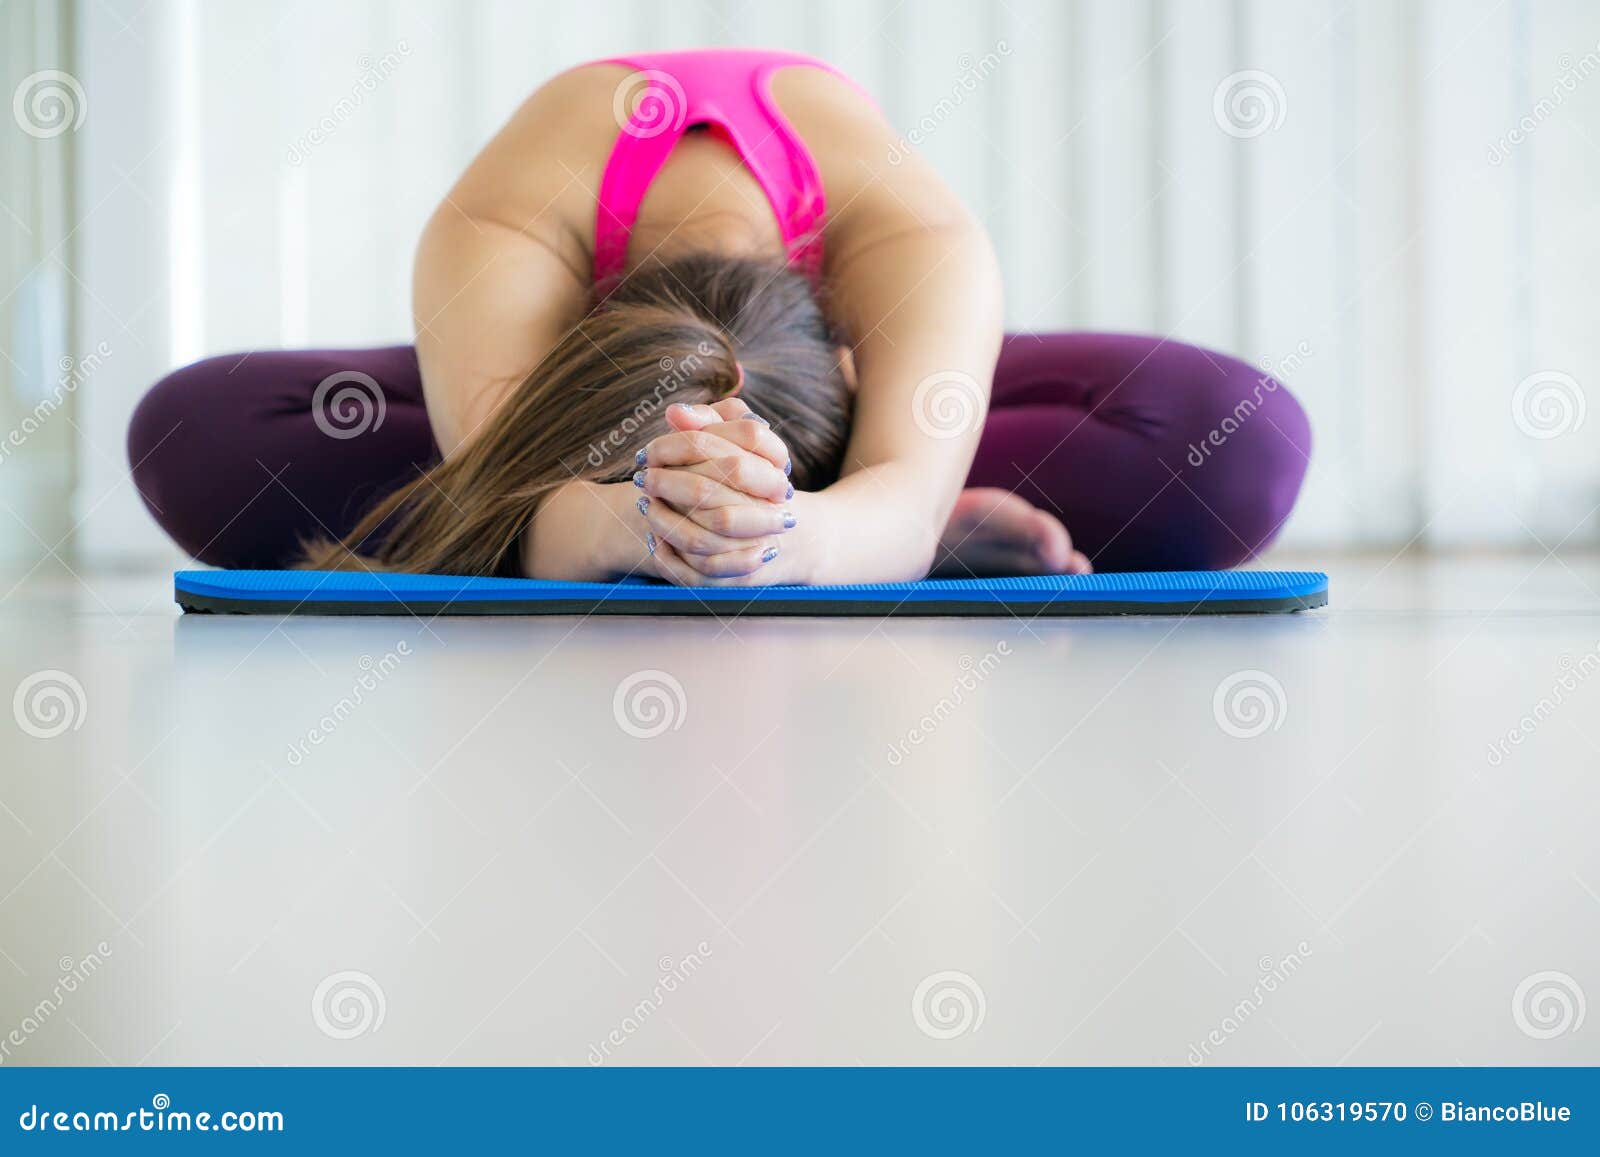 Young Woman Exercising Stretching Back Yoga Pose Stock Photo